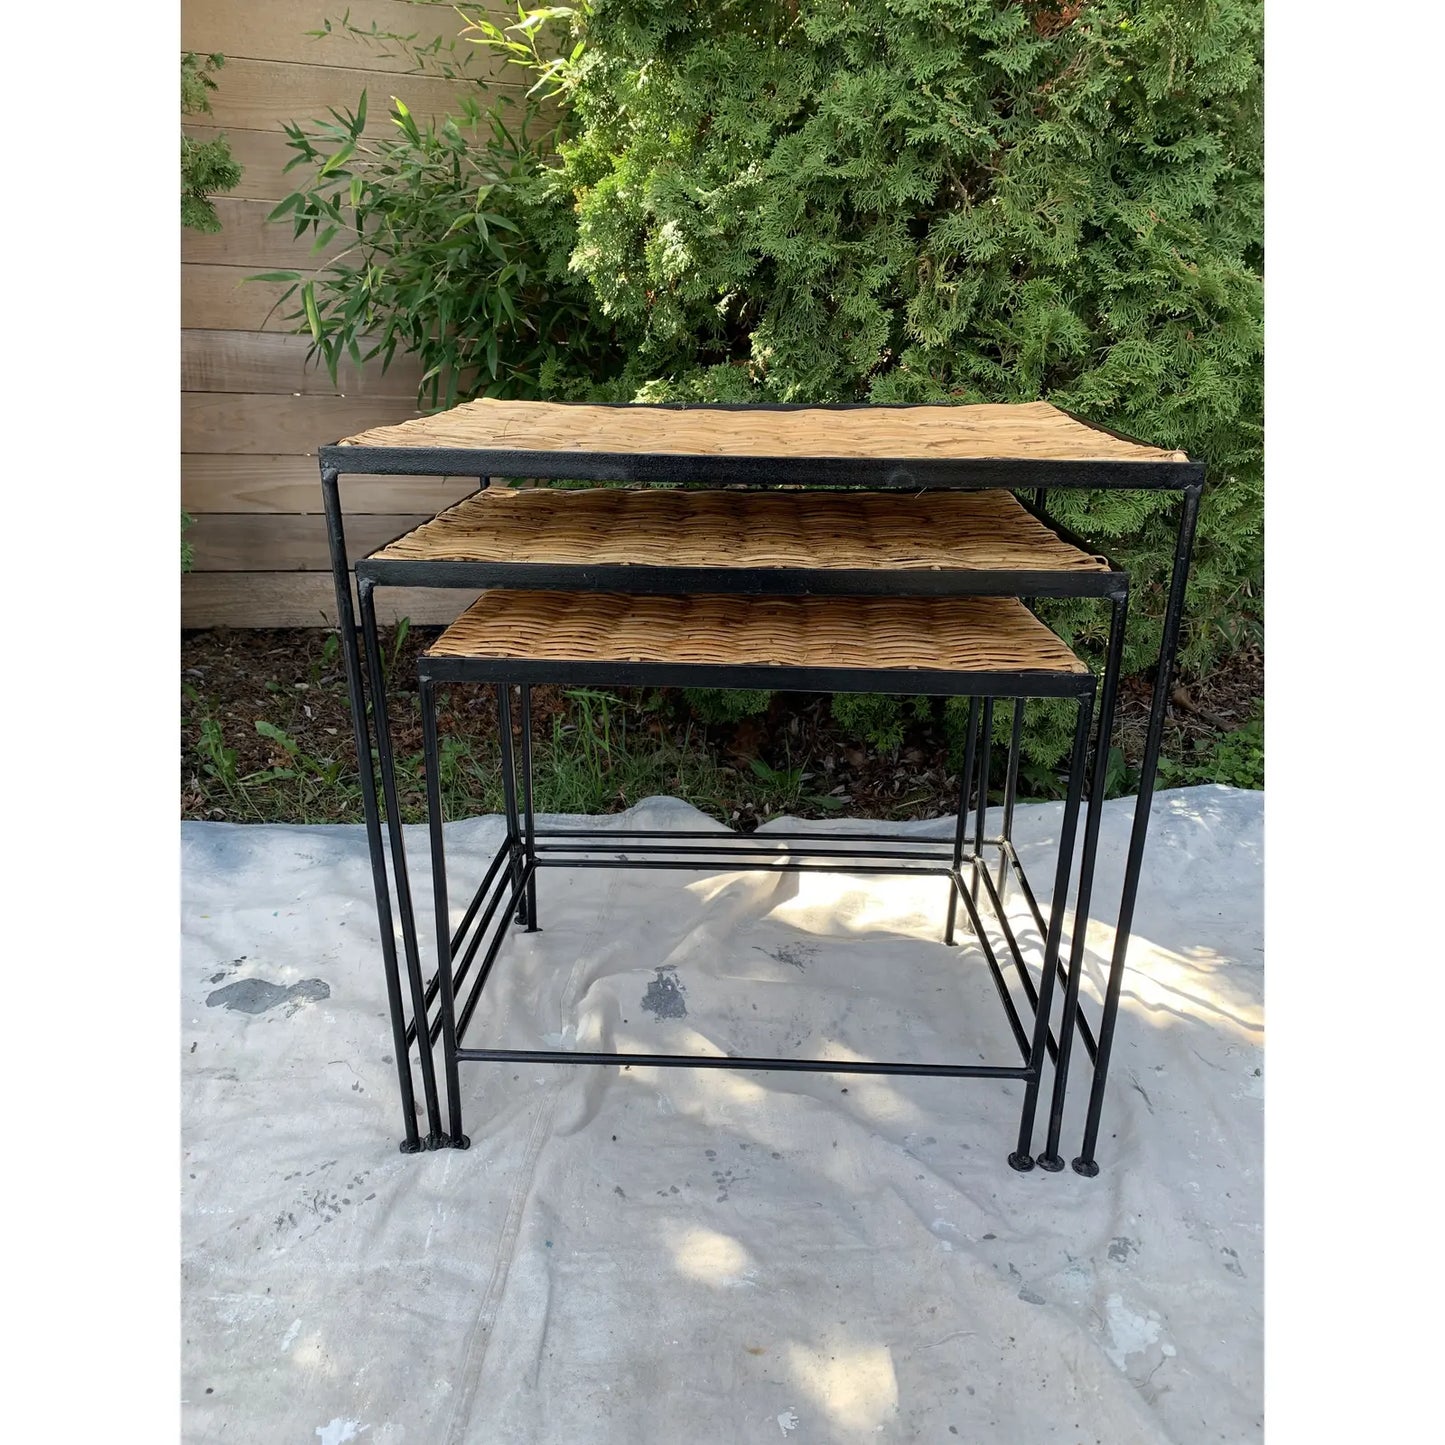 Mid-Century Modern California Style Cane and Iron Nesting Tables - 3 Pieces